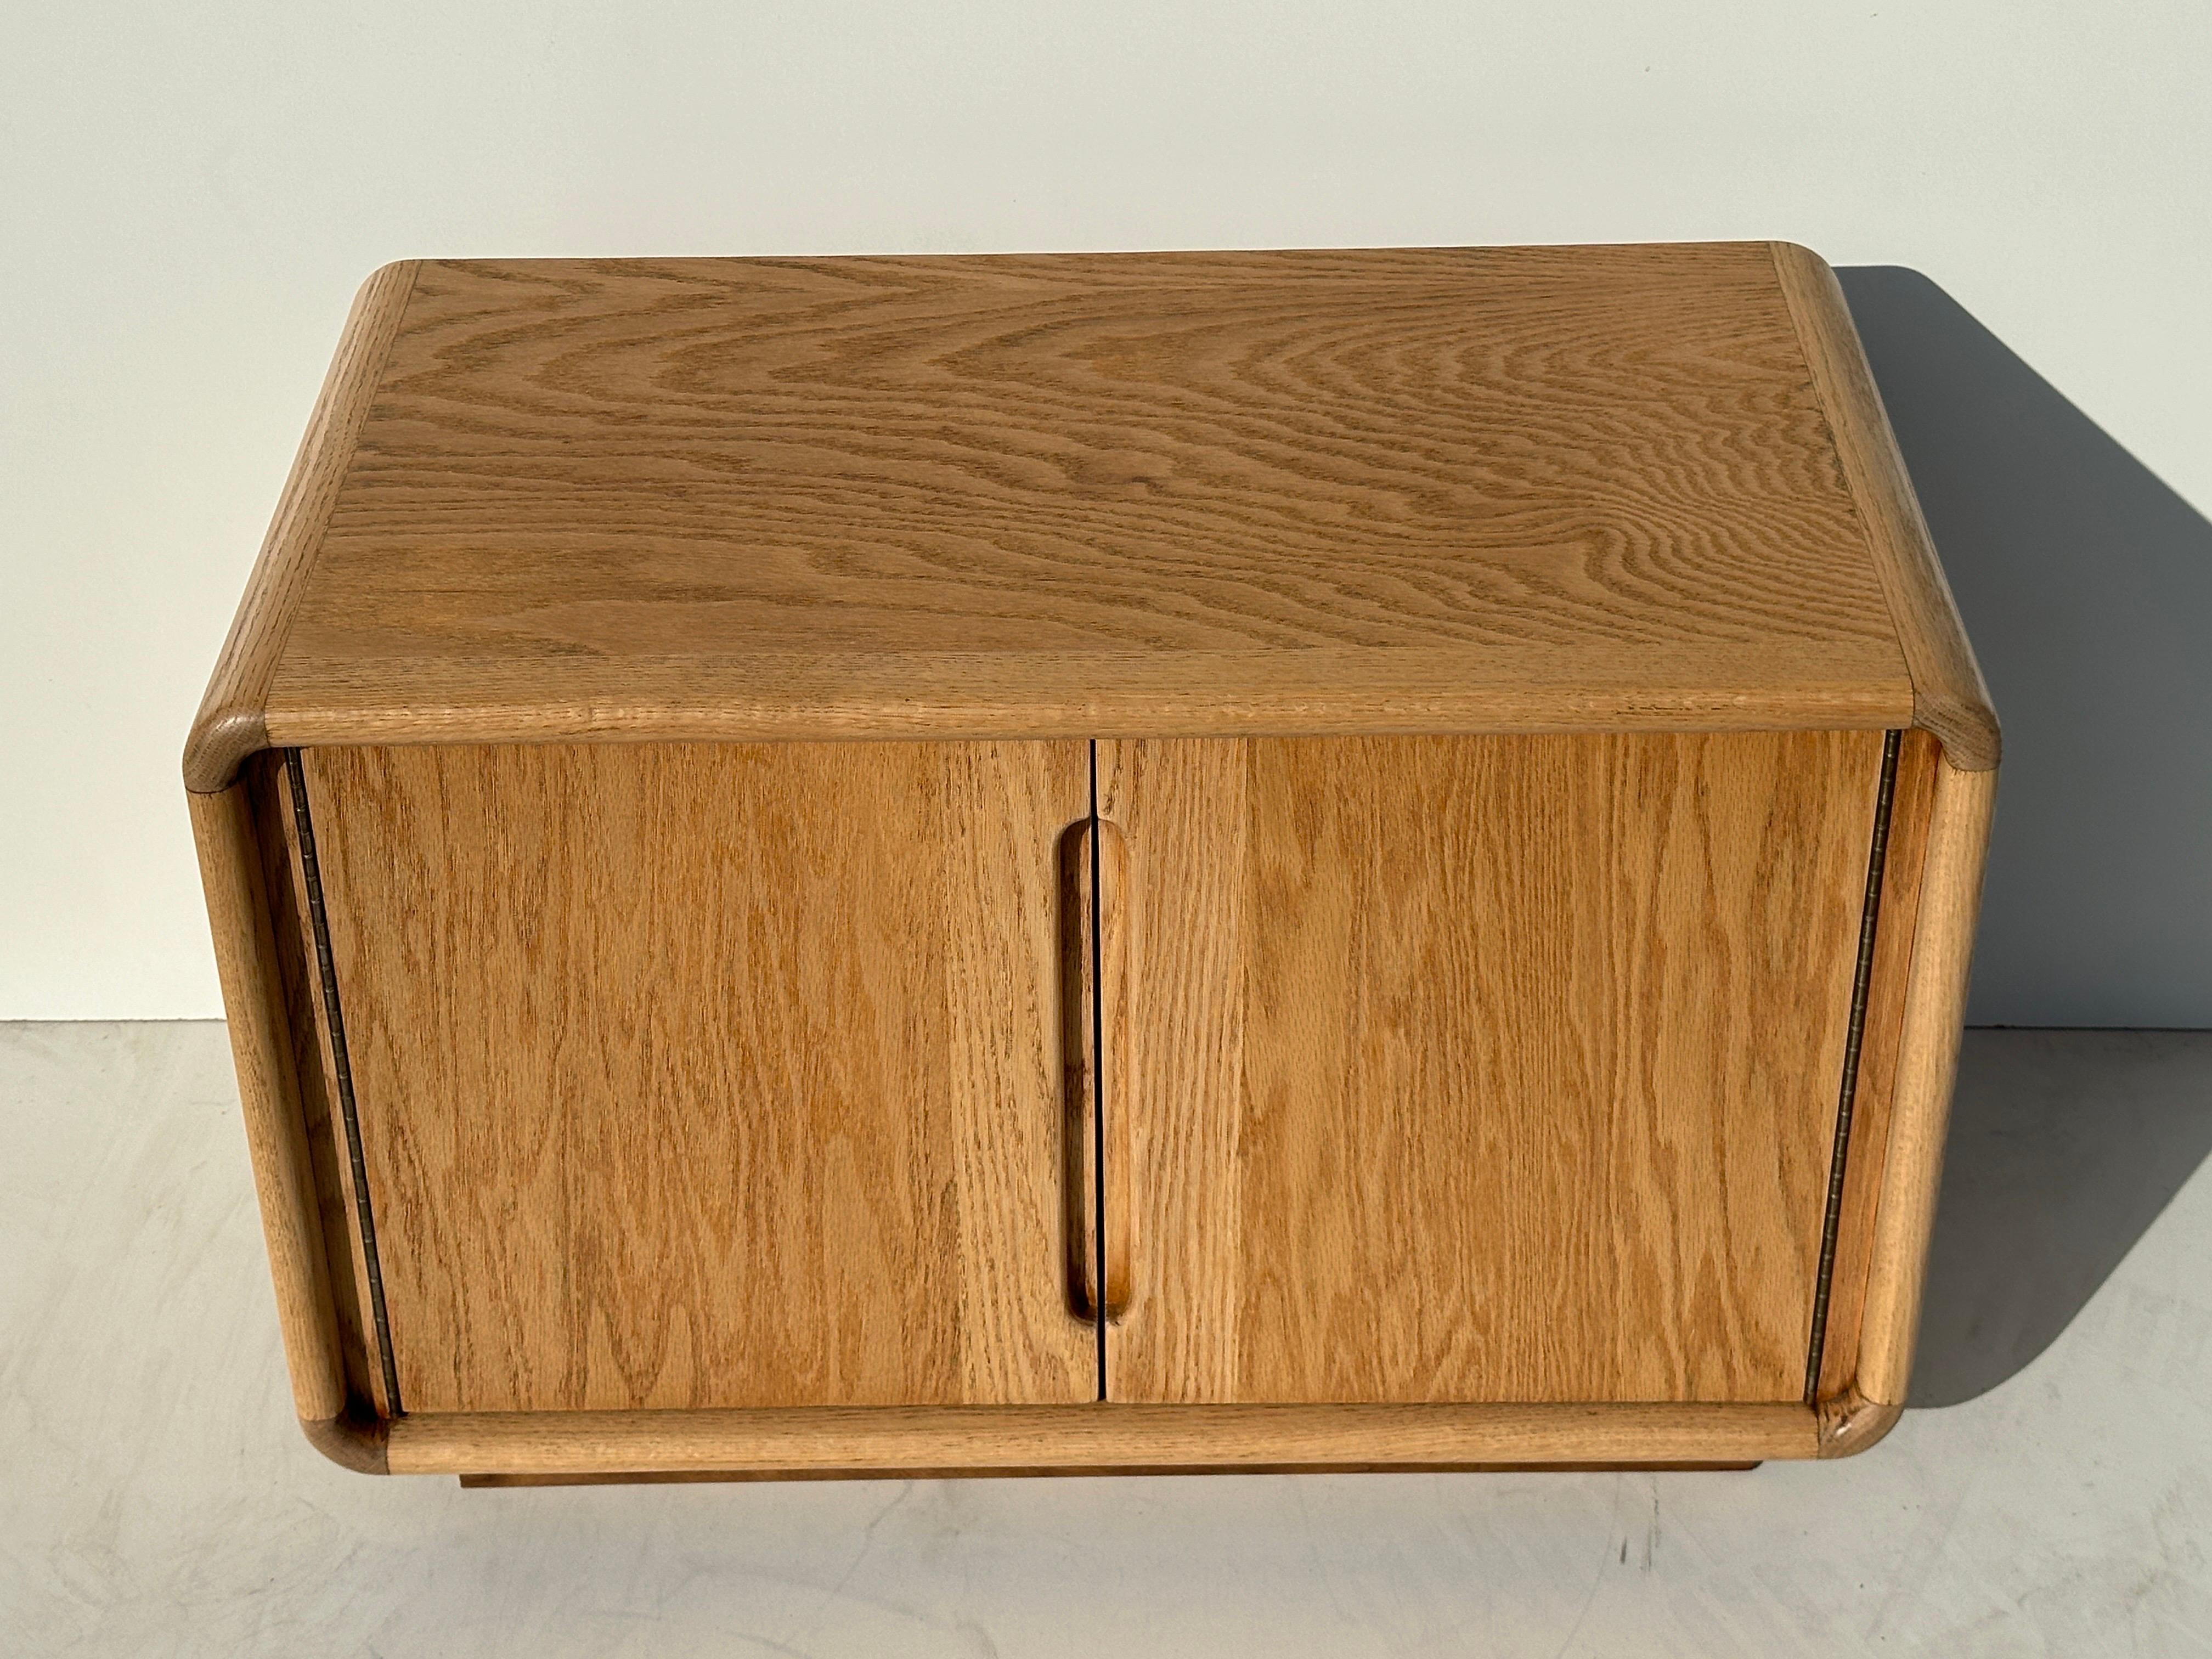 Bleached natural oak organic two door cabinet / nightstand with walnut base.